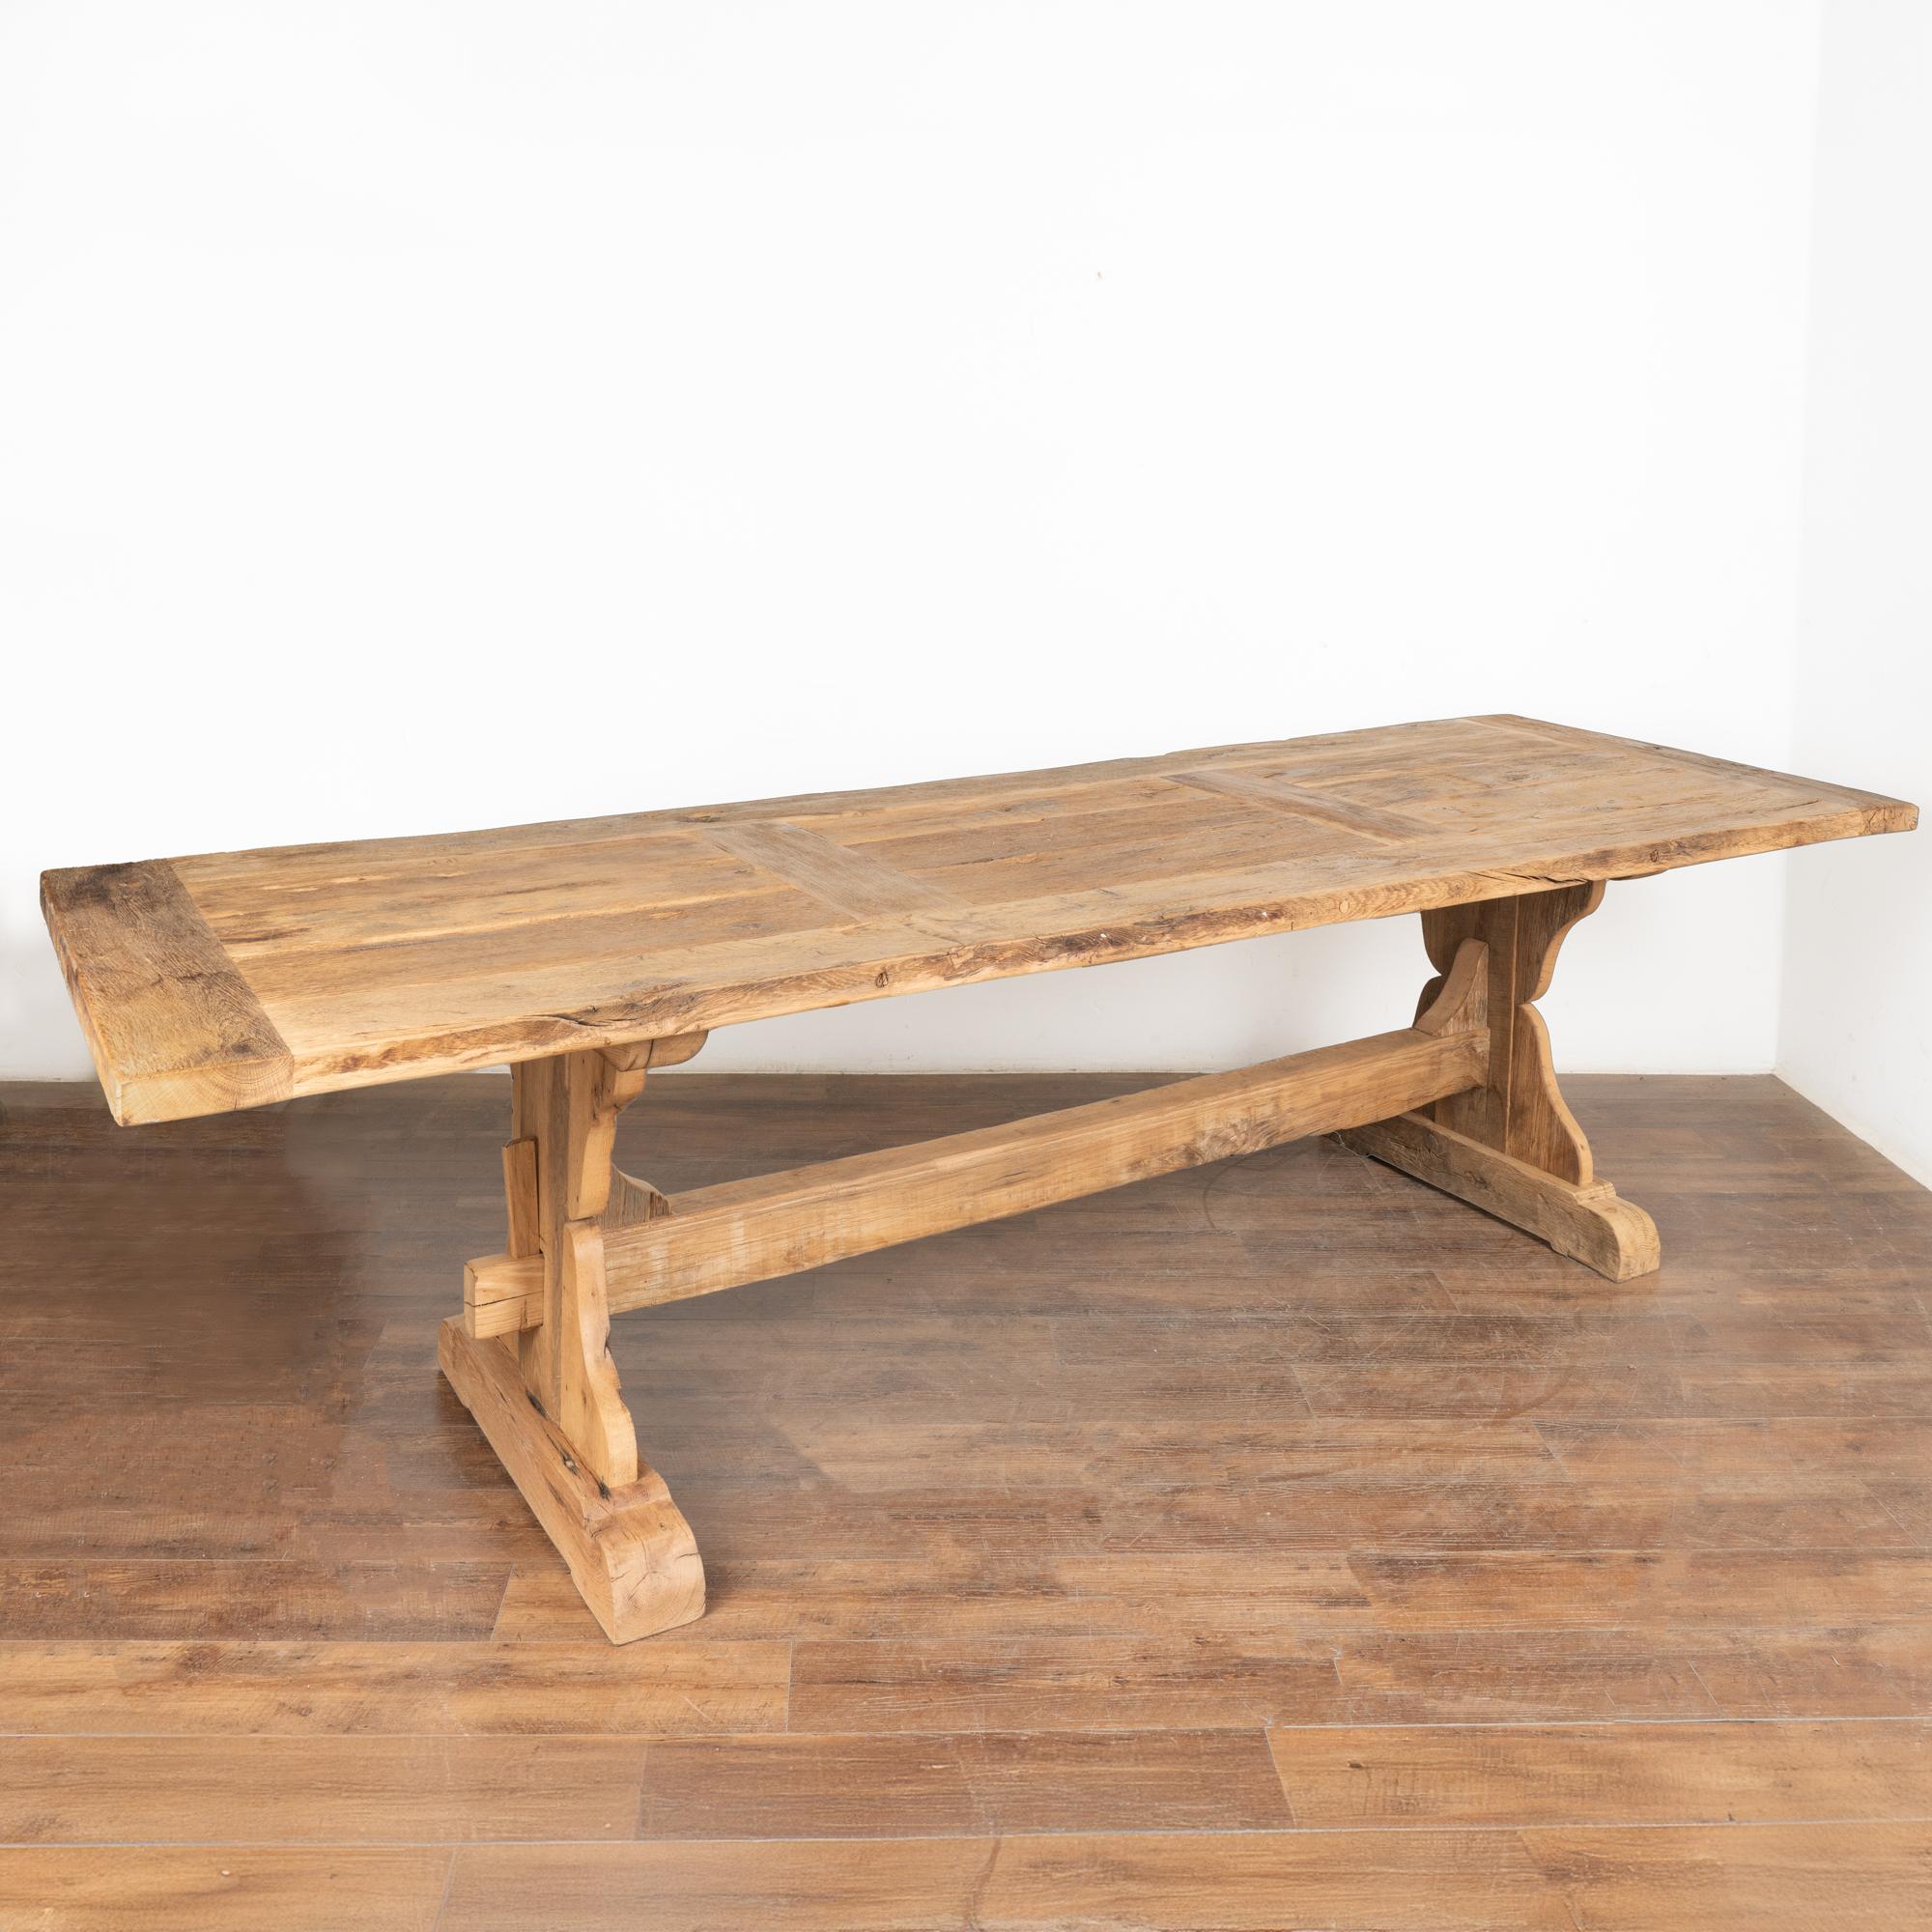 This dramatic bleached oak dining table from France with impressive trestle base is just over 11' long.
Enlarge photos to appreciate the pattern in the aged oak of the top, as well as the old cracks, knarls, and even dried worm holes that add to its